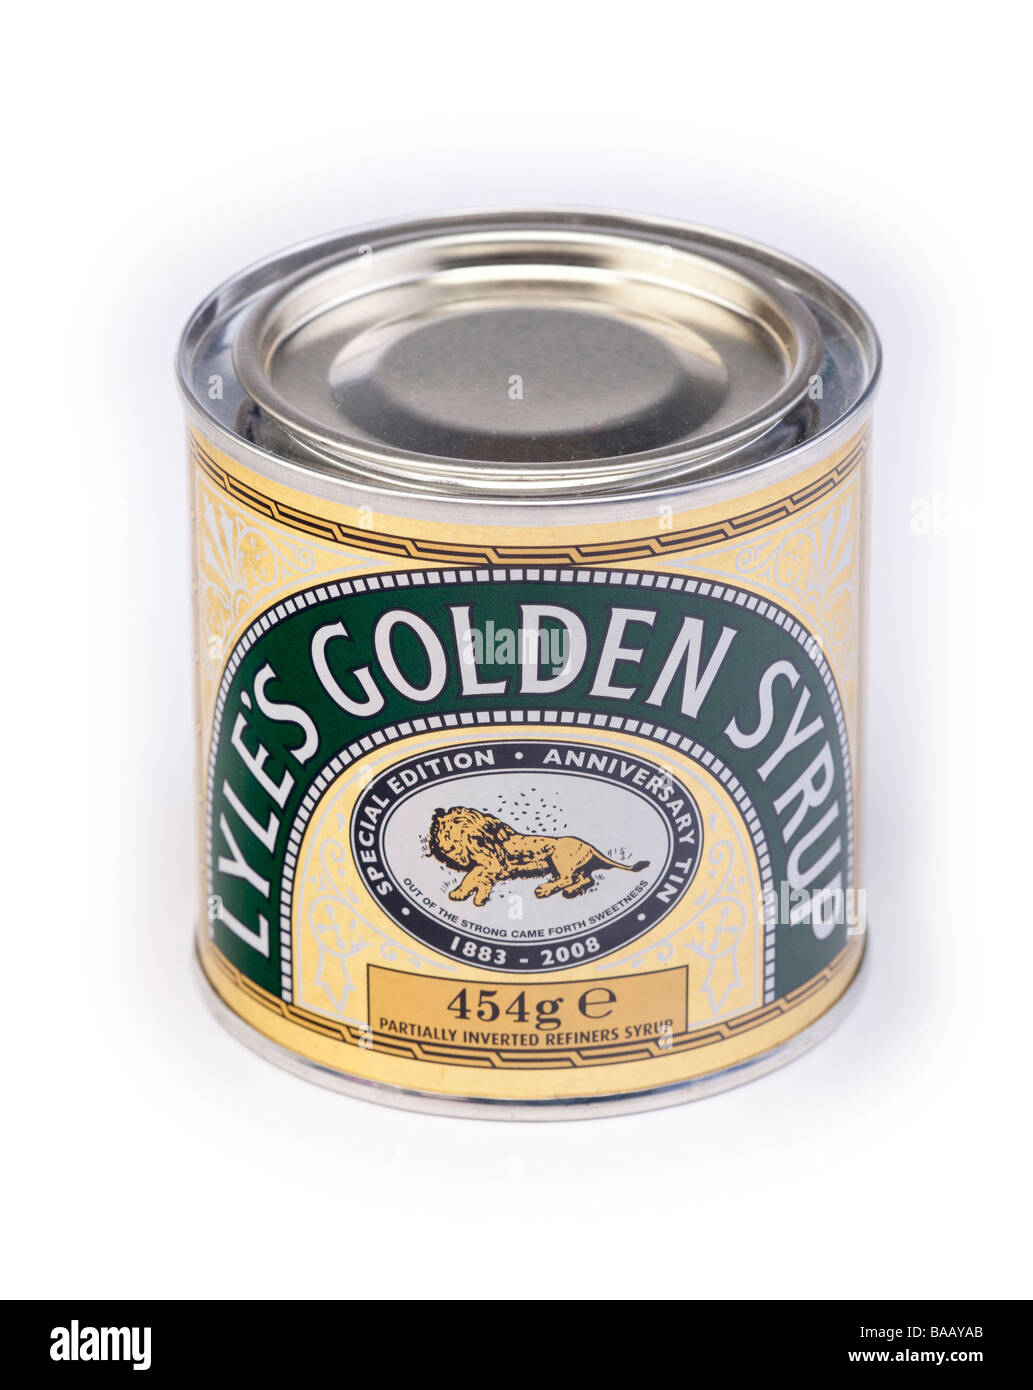 Lyles's golden syrup by Tate & Lyle Stock Photo